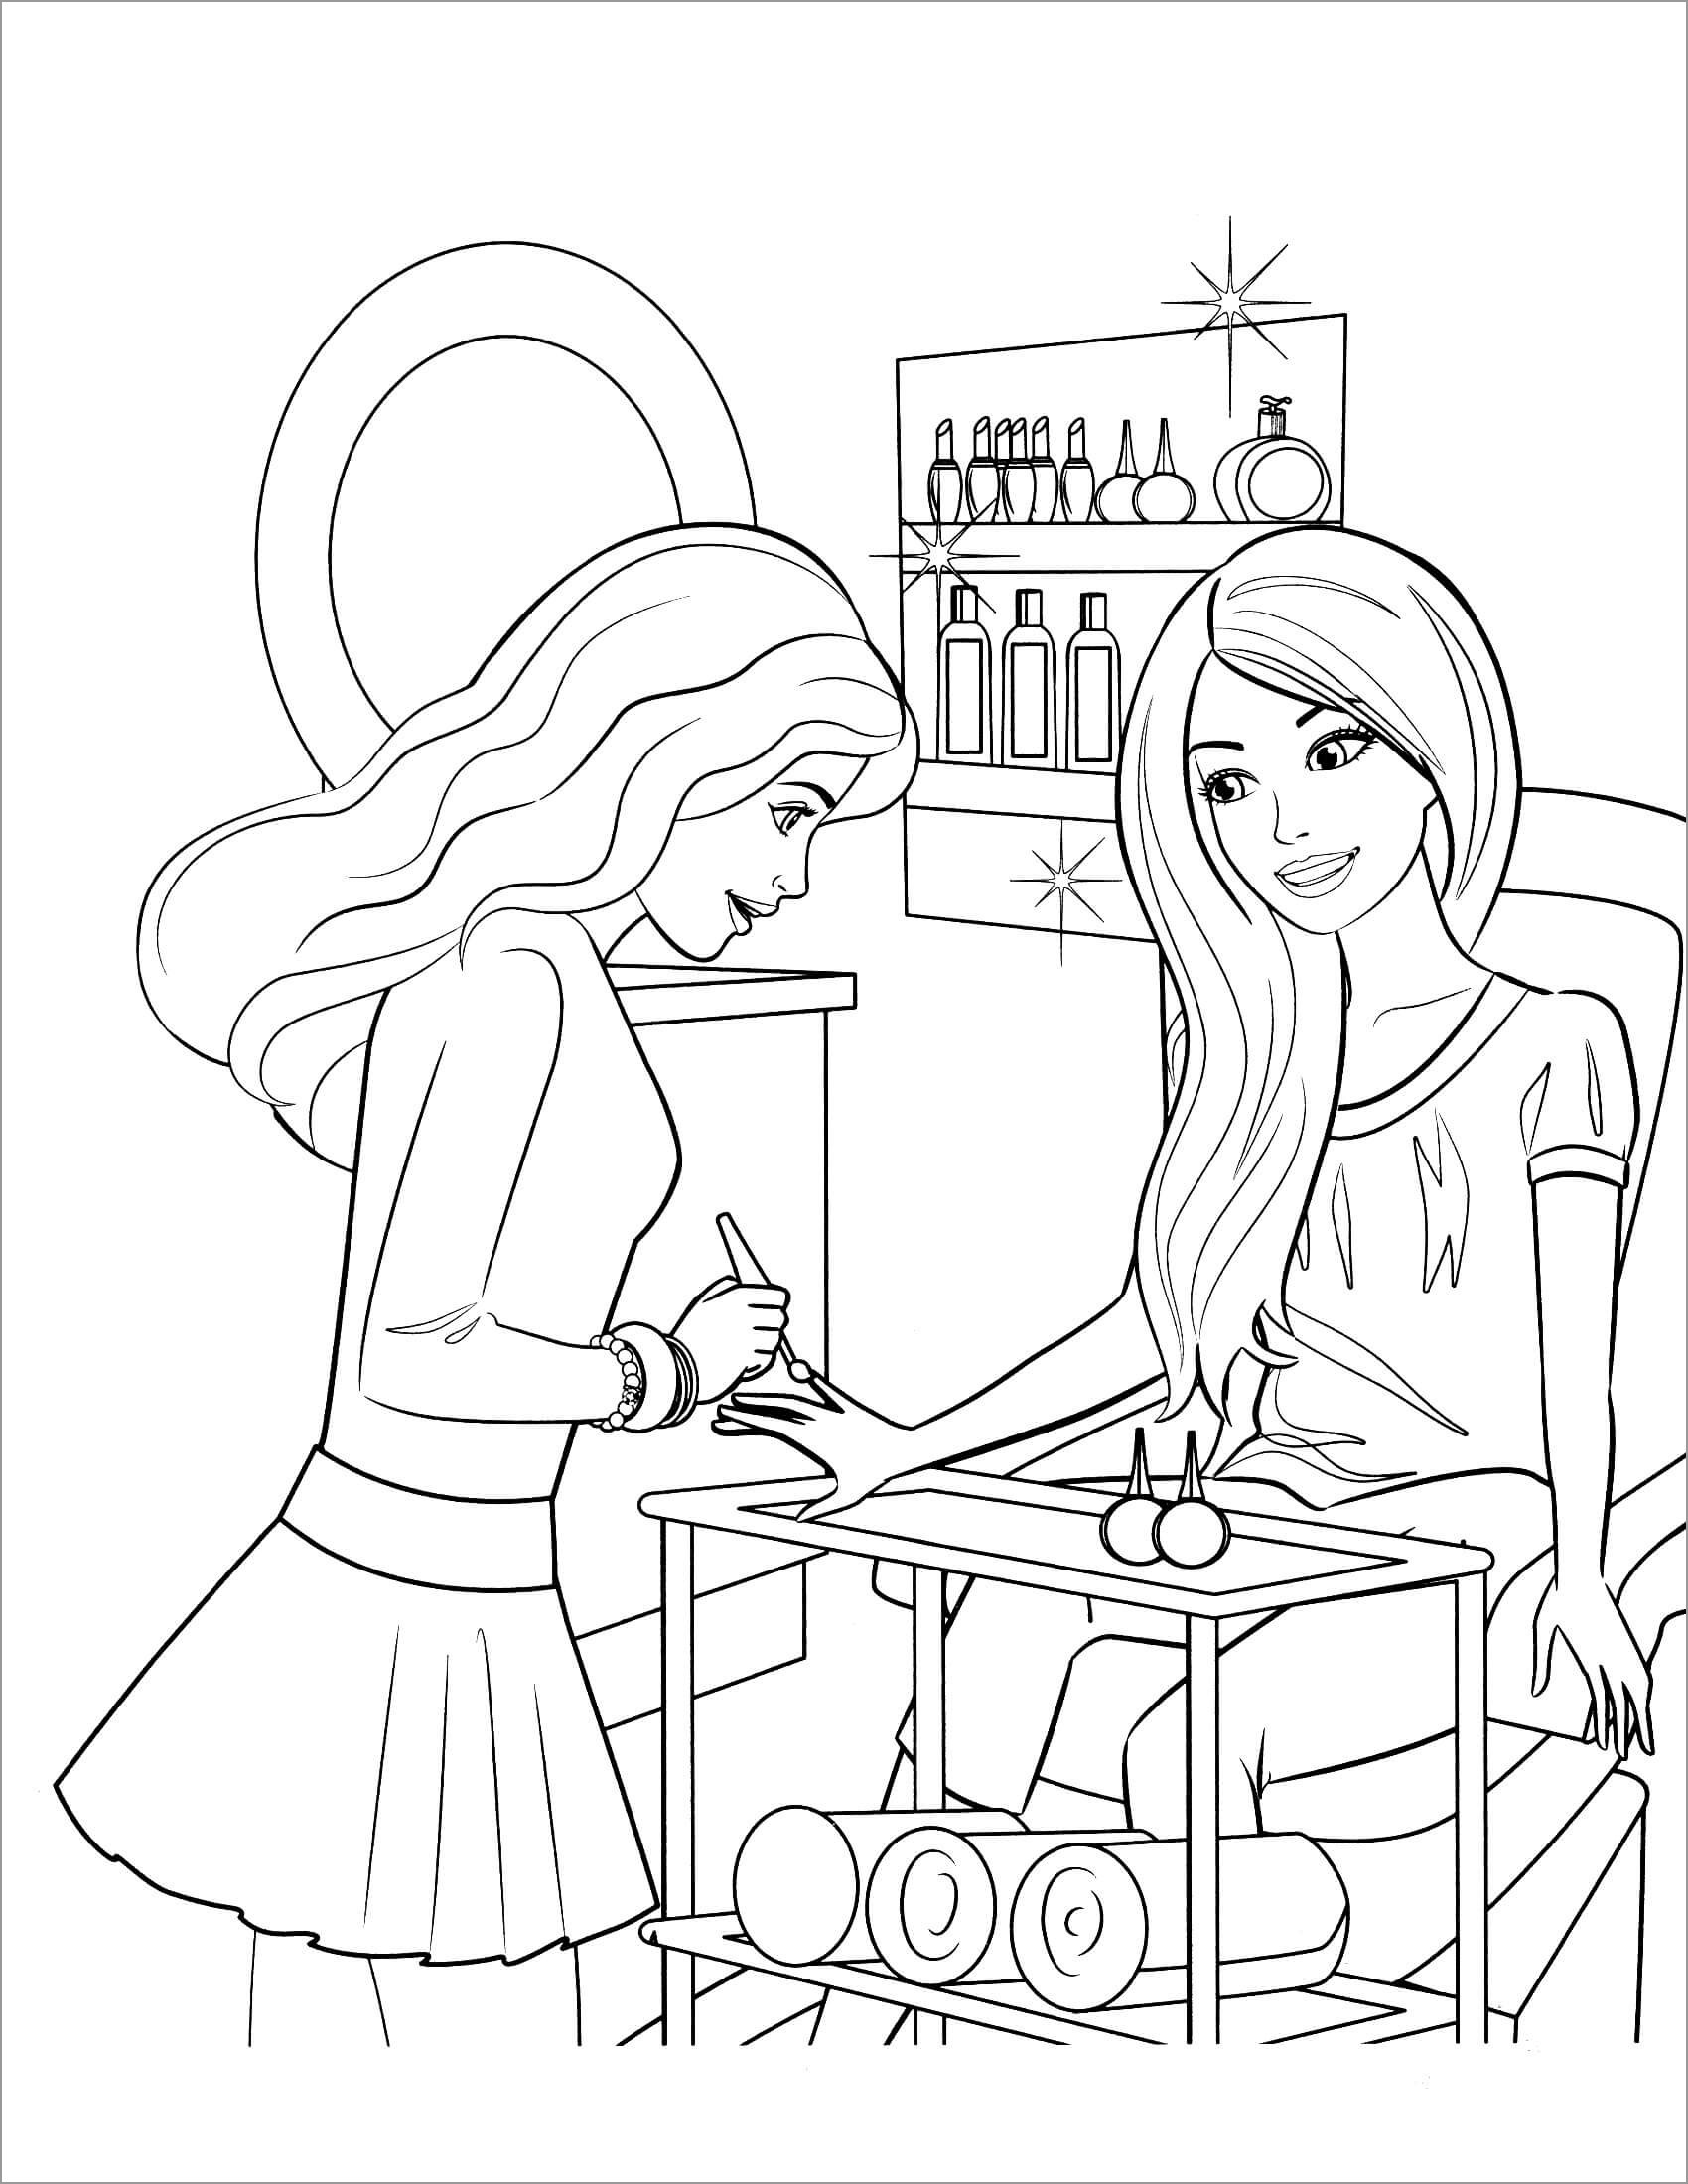 Barbie at the Beauty Salon Coloring Page   ColoringBay